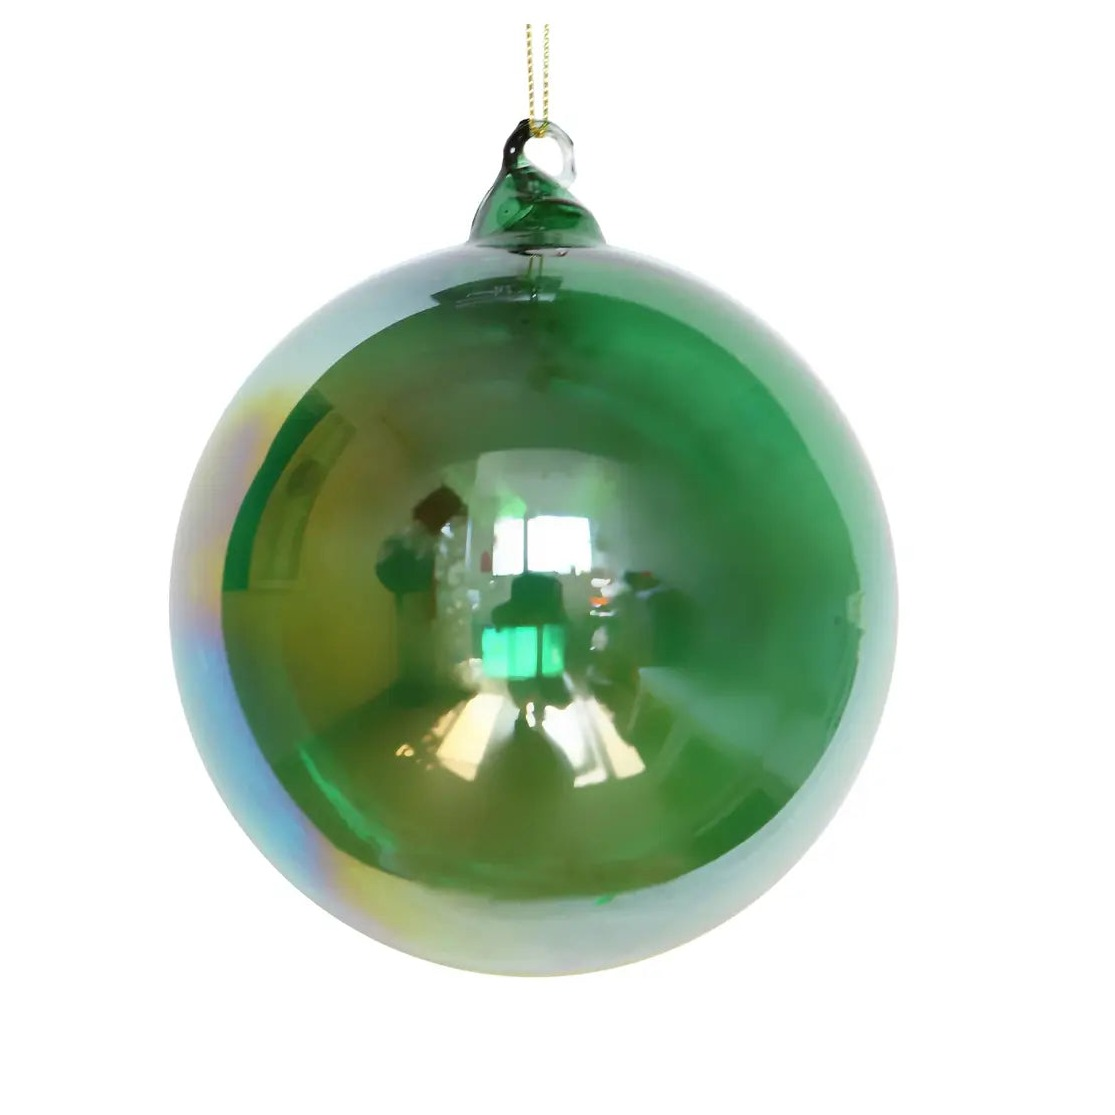 Jim Marvin Bottle Glass Ornament in Emerald Green - Home Smith